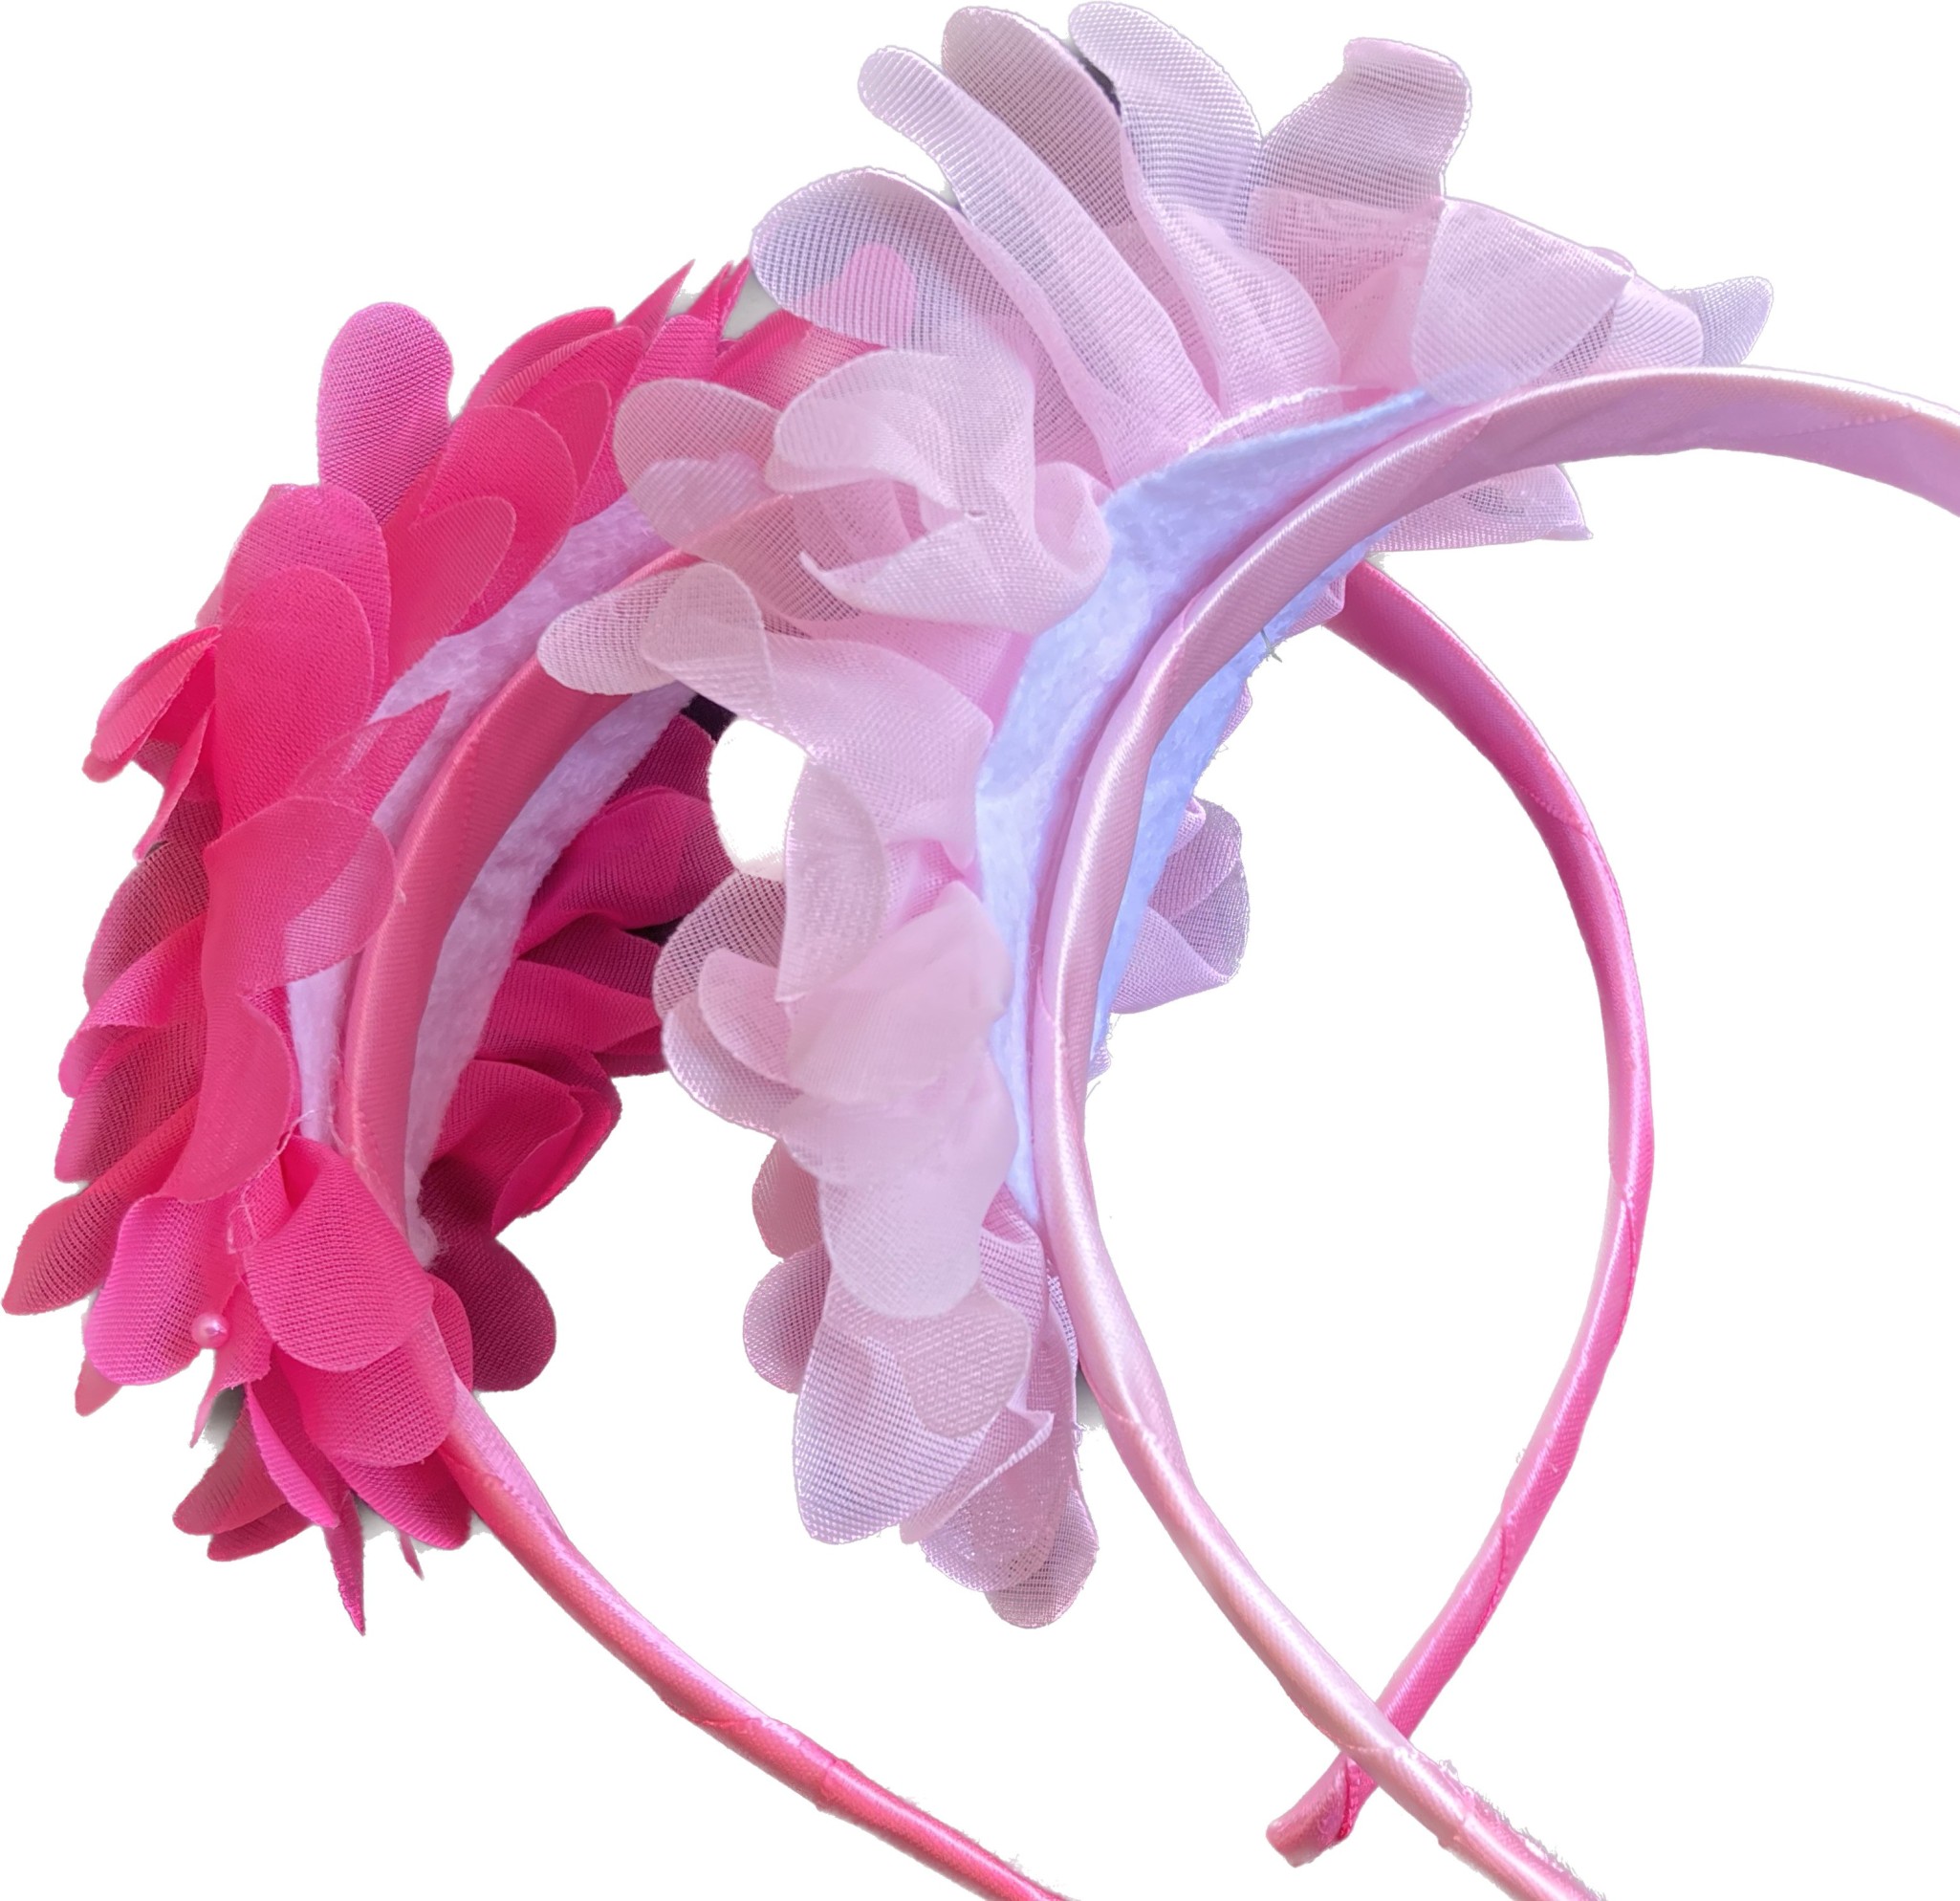 Source ins princess cute bowknot stylish elastic latest hairband designs  plain accessories baby headband for girls hair accessories on malibabacom